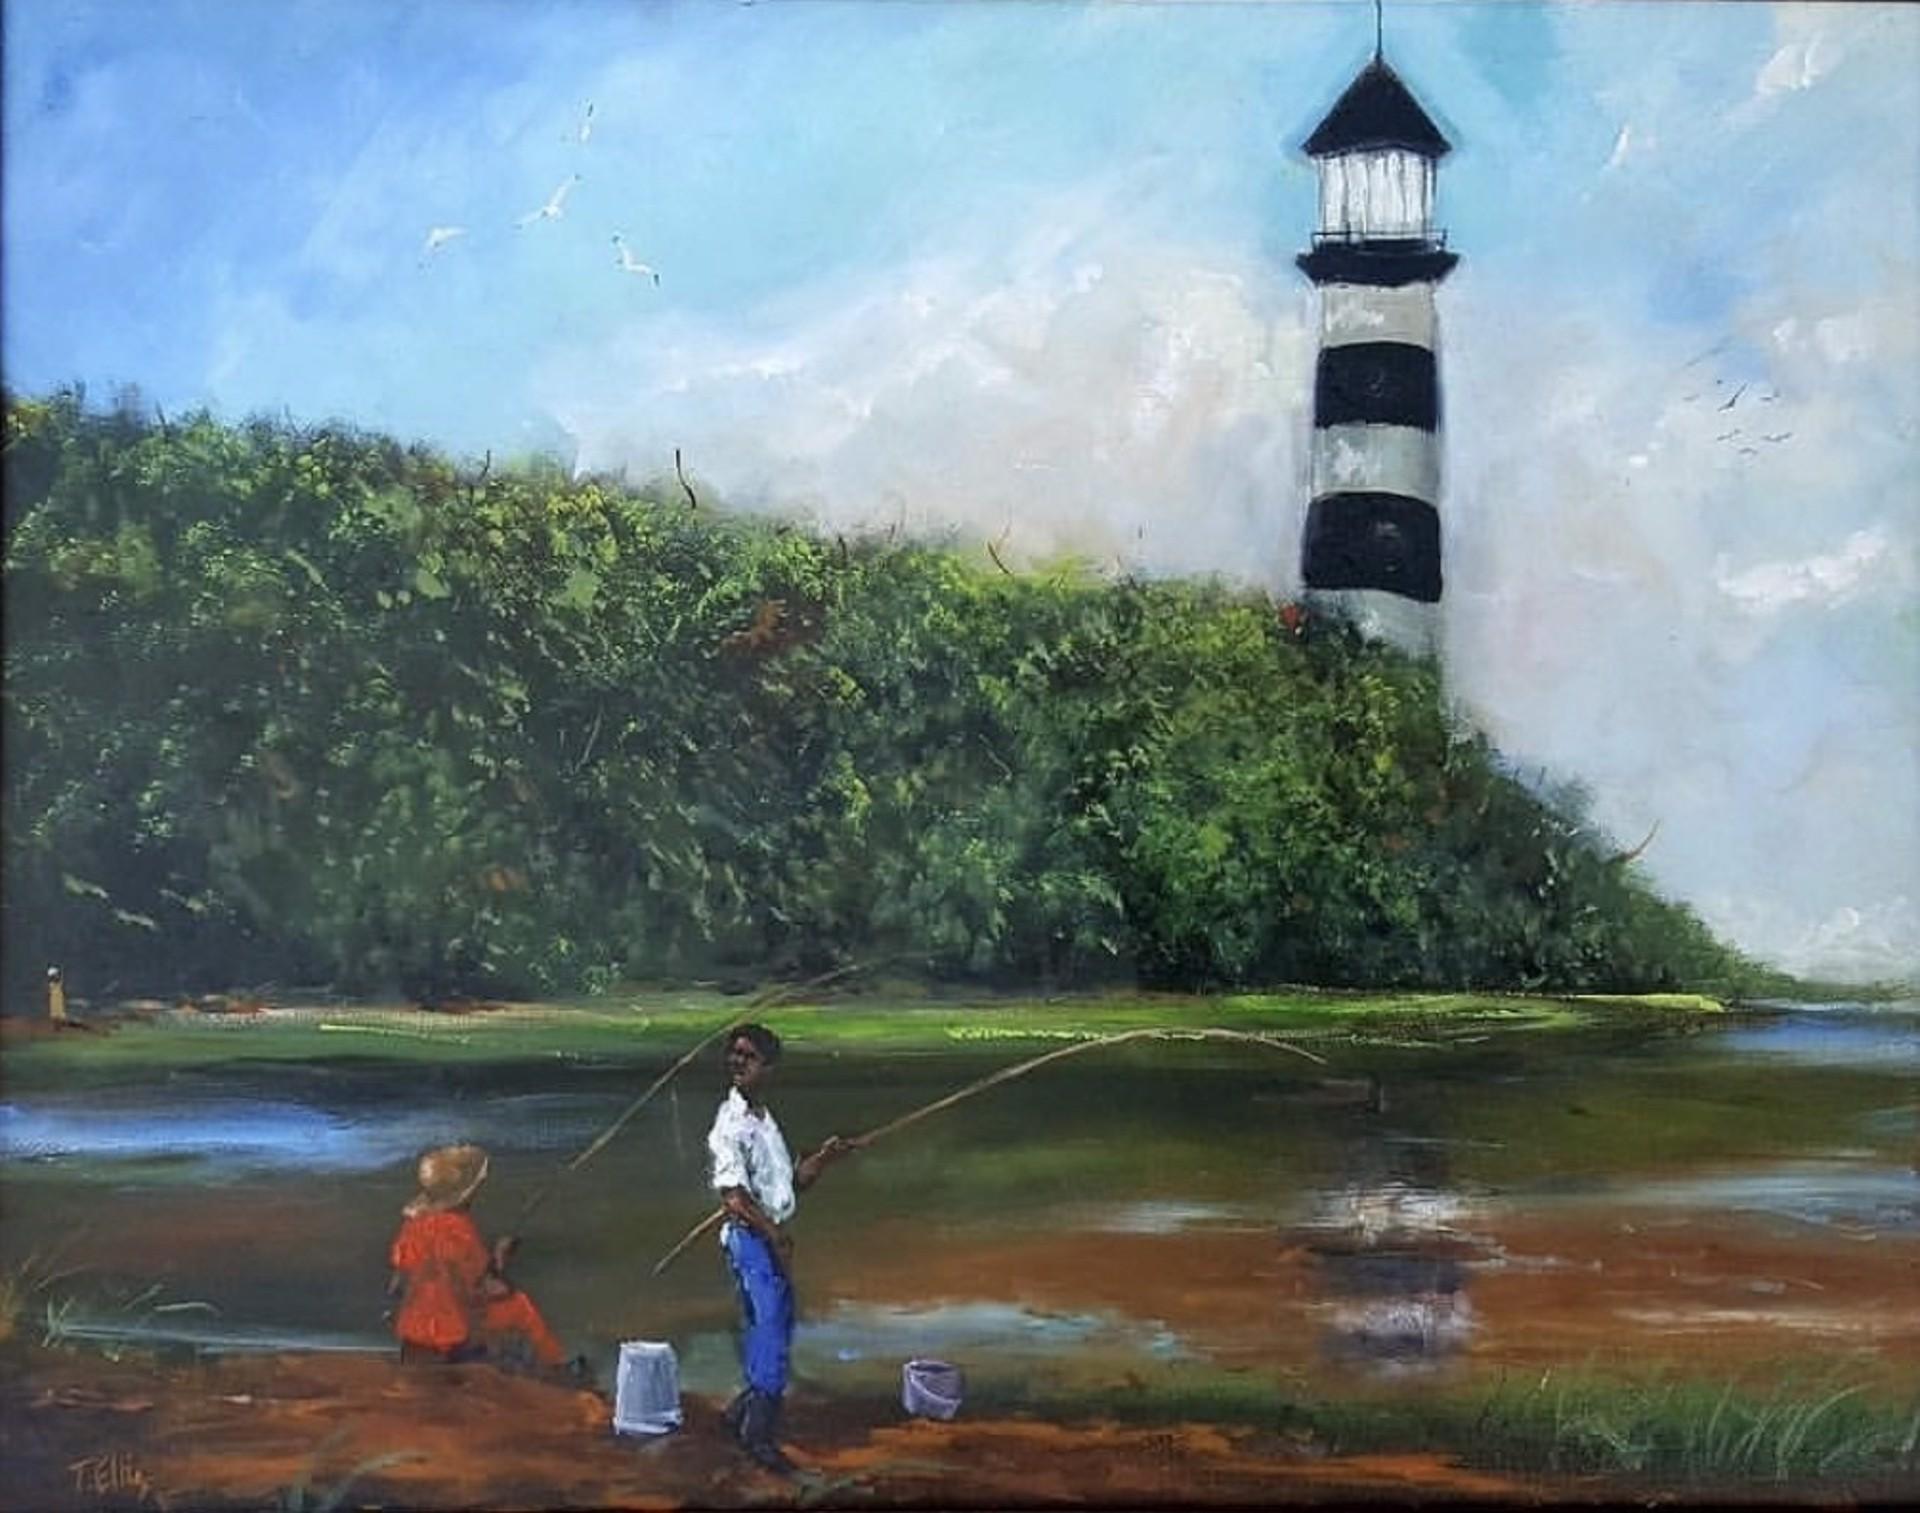 Fishing Near the Lighthouse - Art by Ted Ellis